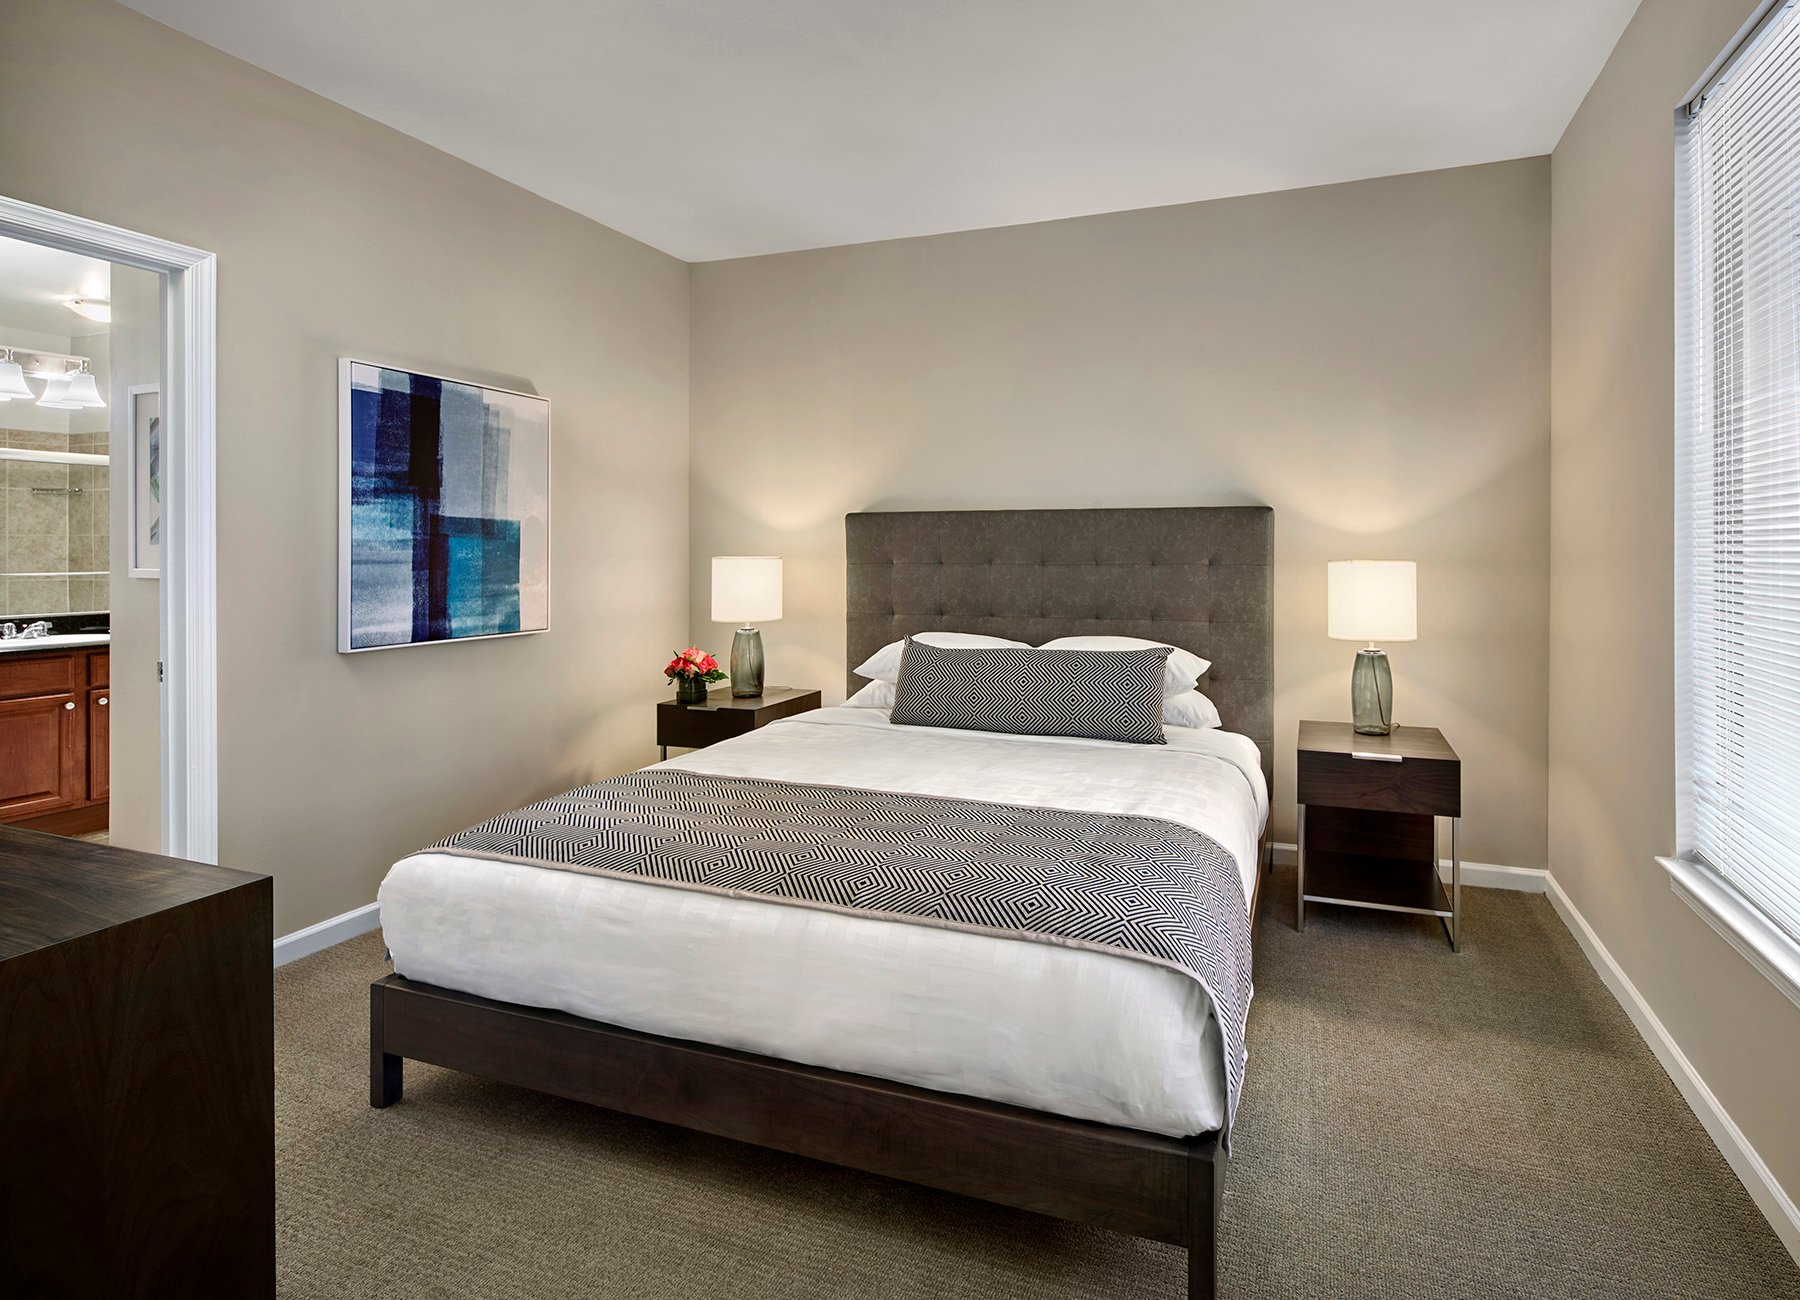 AVE Union furnished apartment bedroom with king bed, en-suite bathroom, and sophisticated artwork